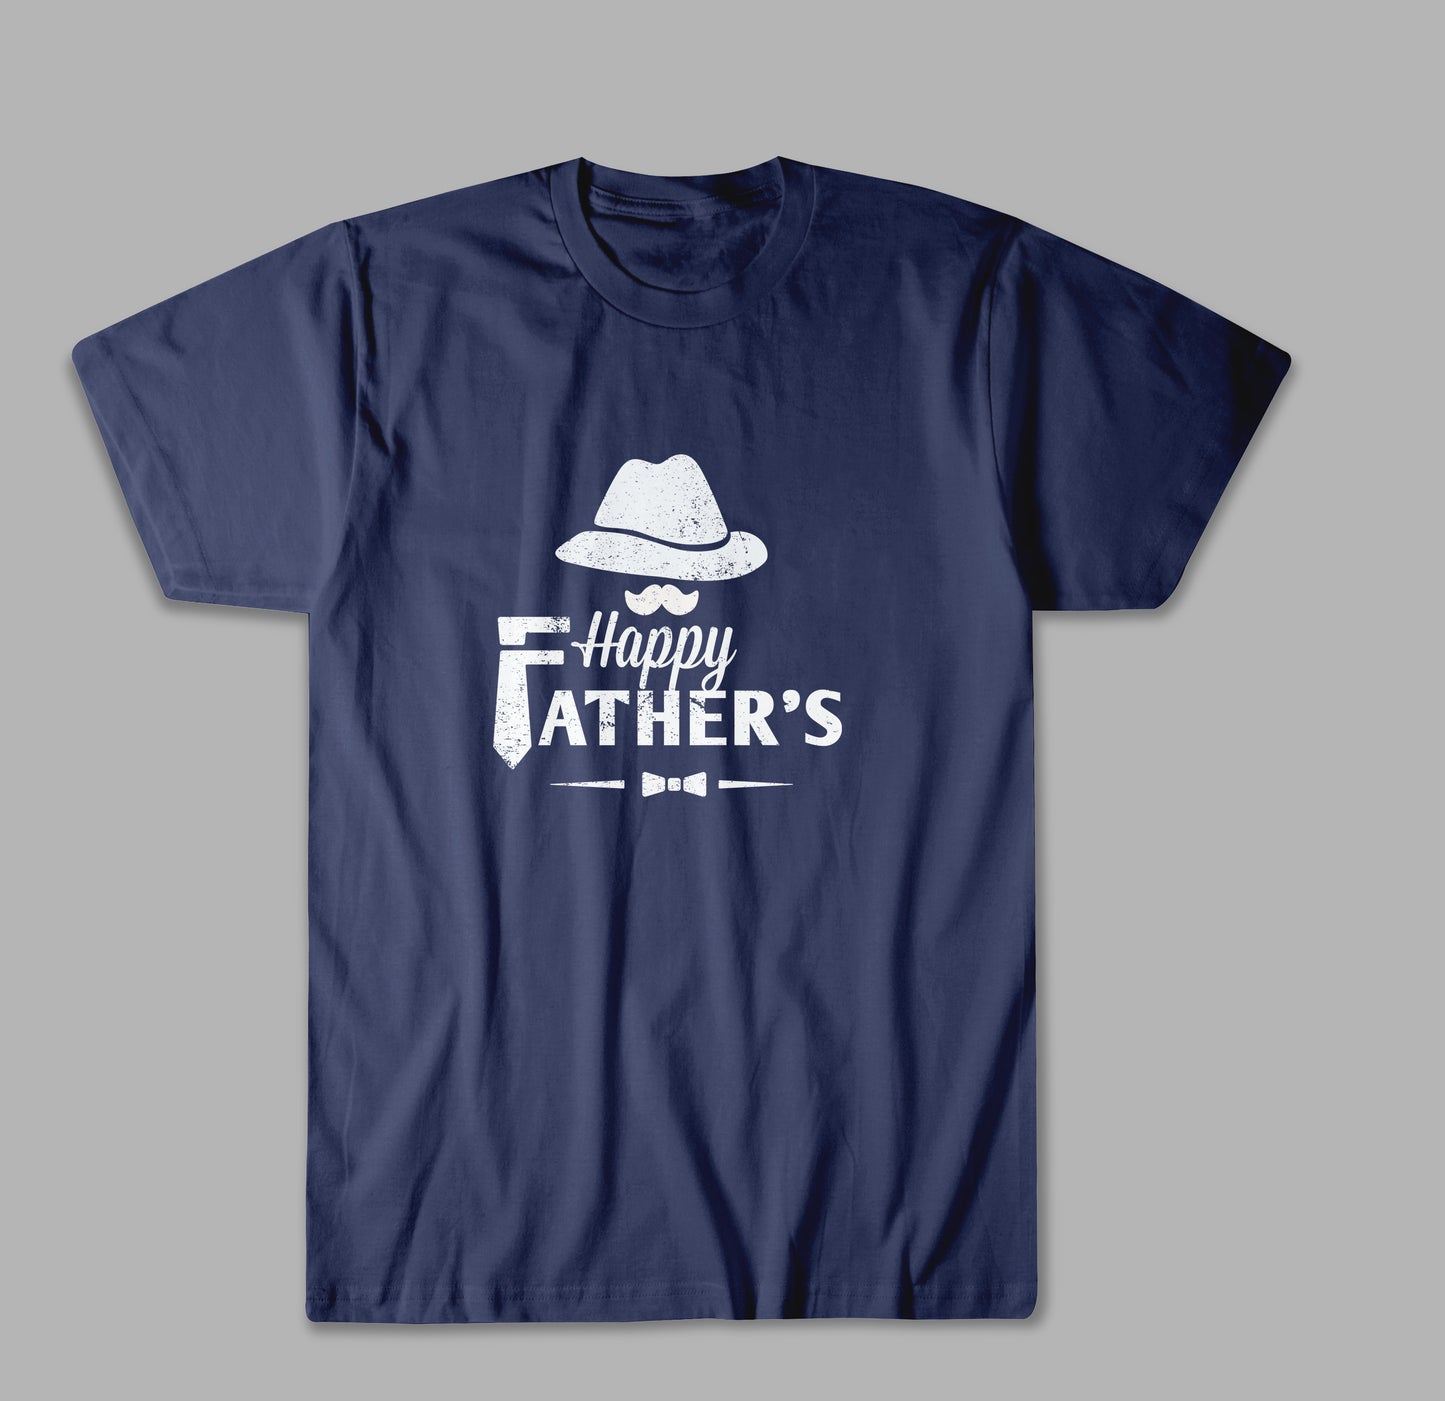 Happy FATHER'S Happy Father‘s Day T Shirt PJ3